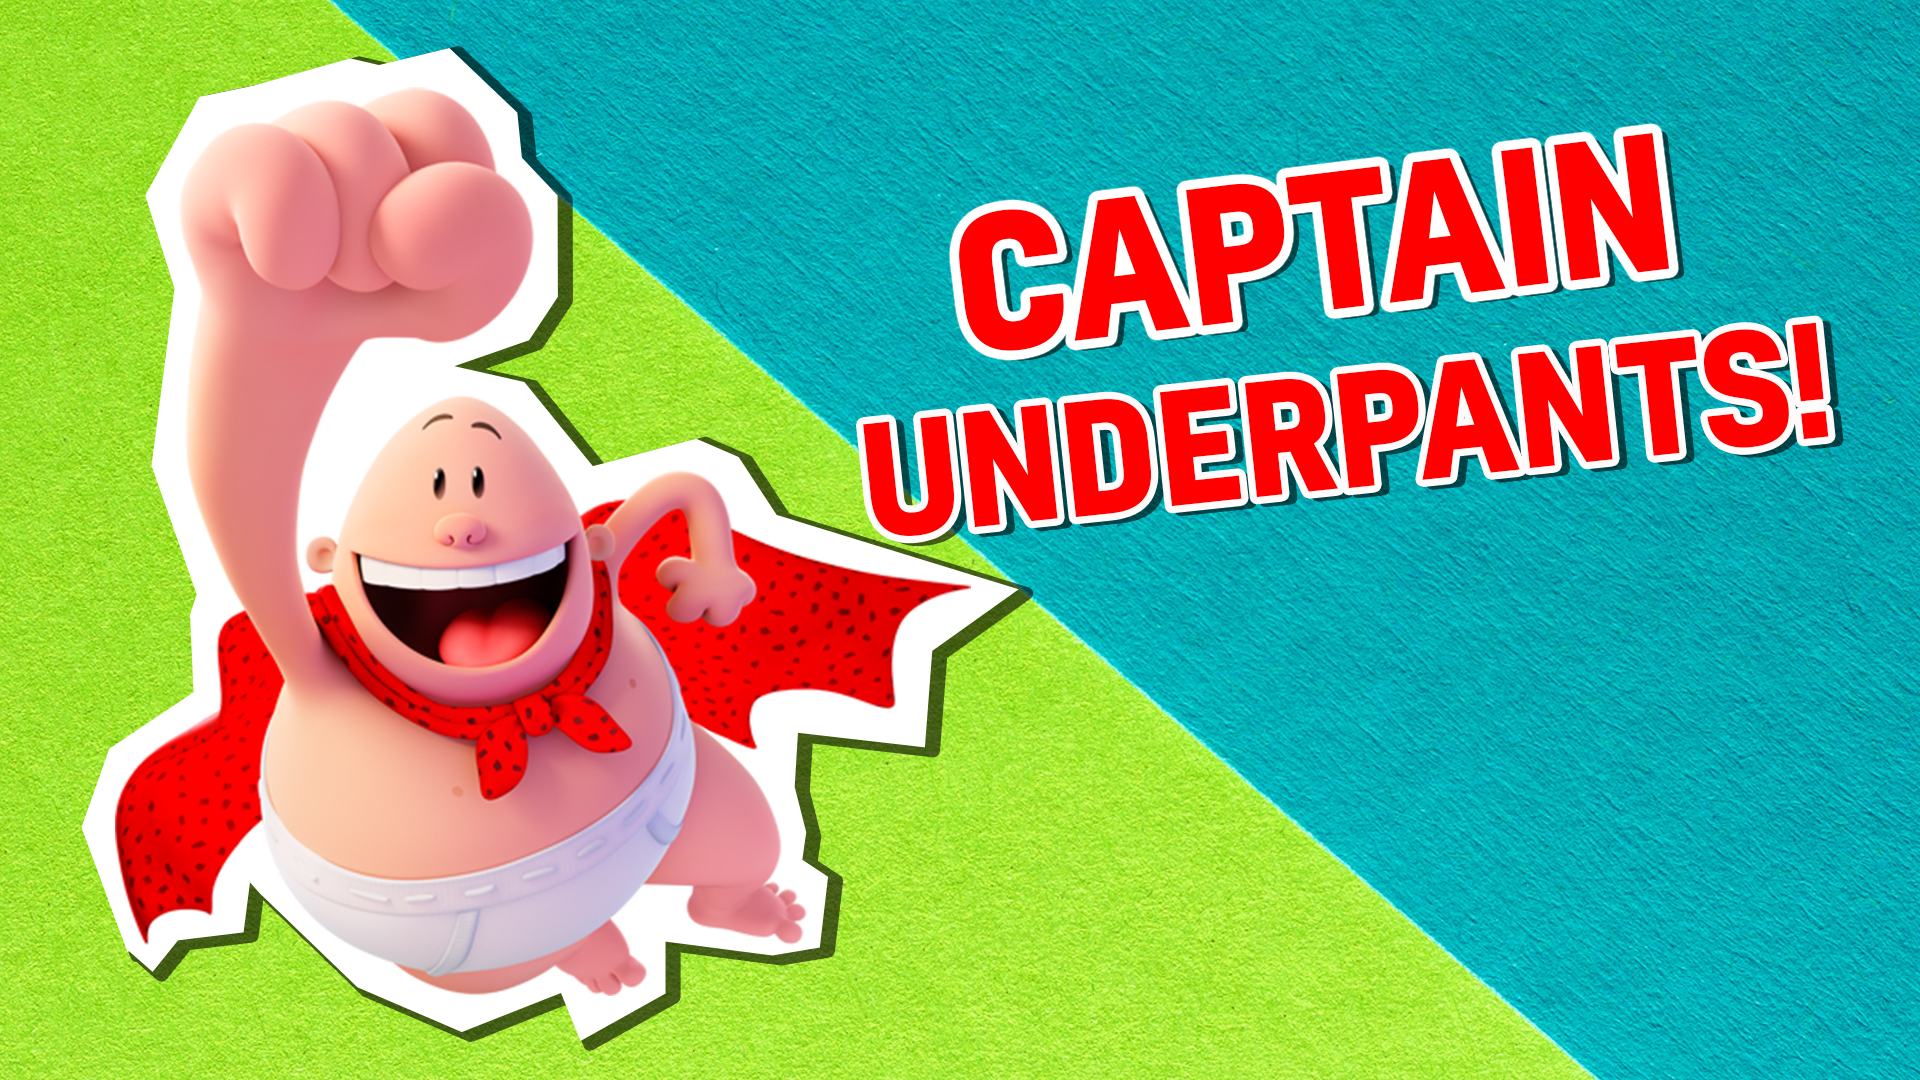 Captain Underpants: The First Epic Movie!